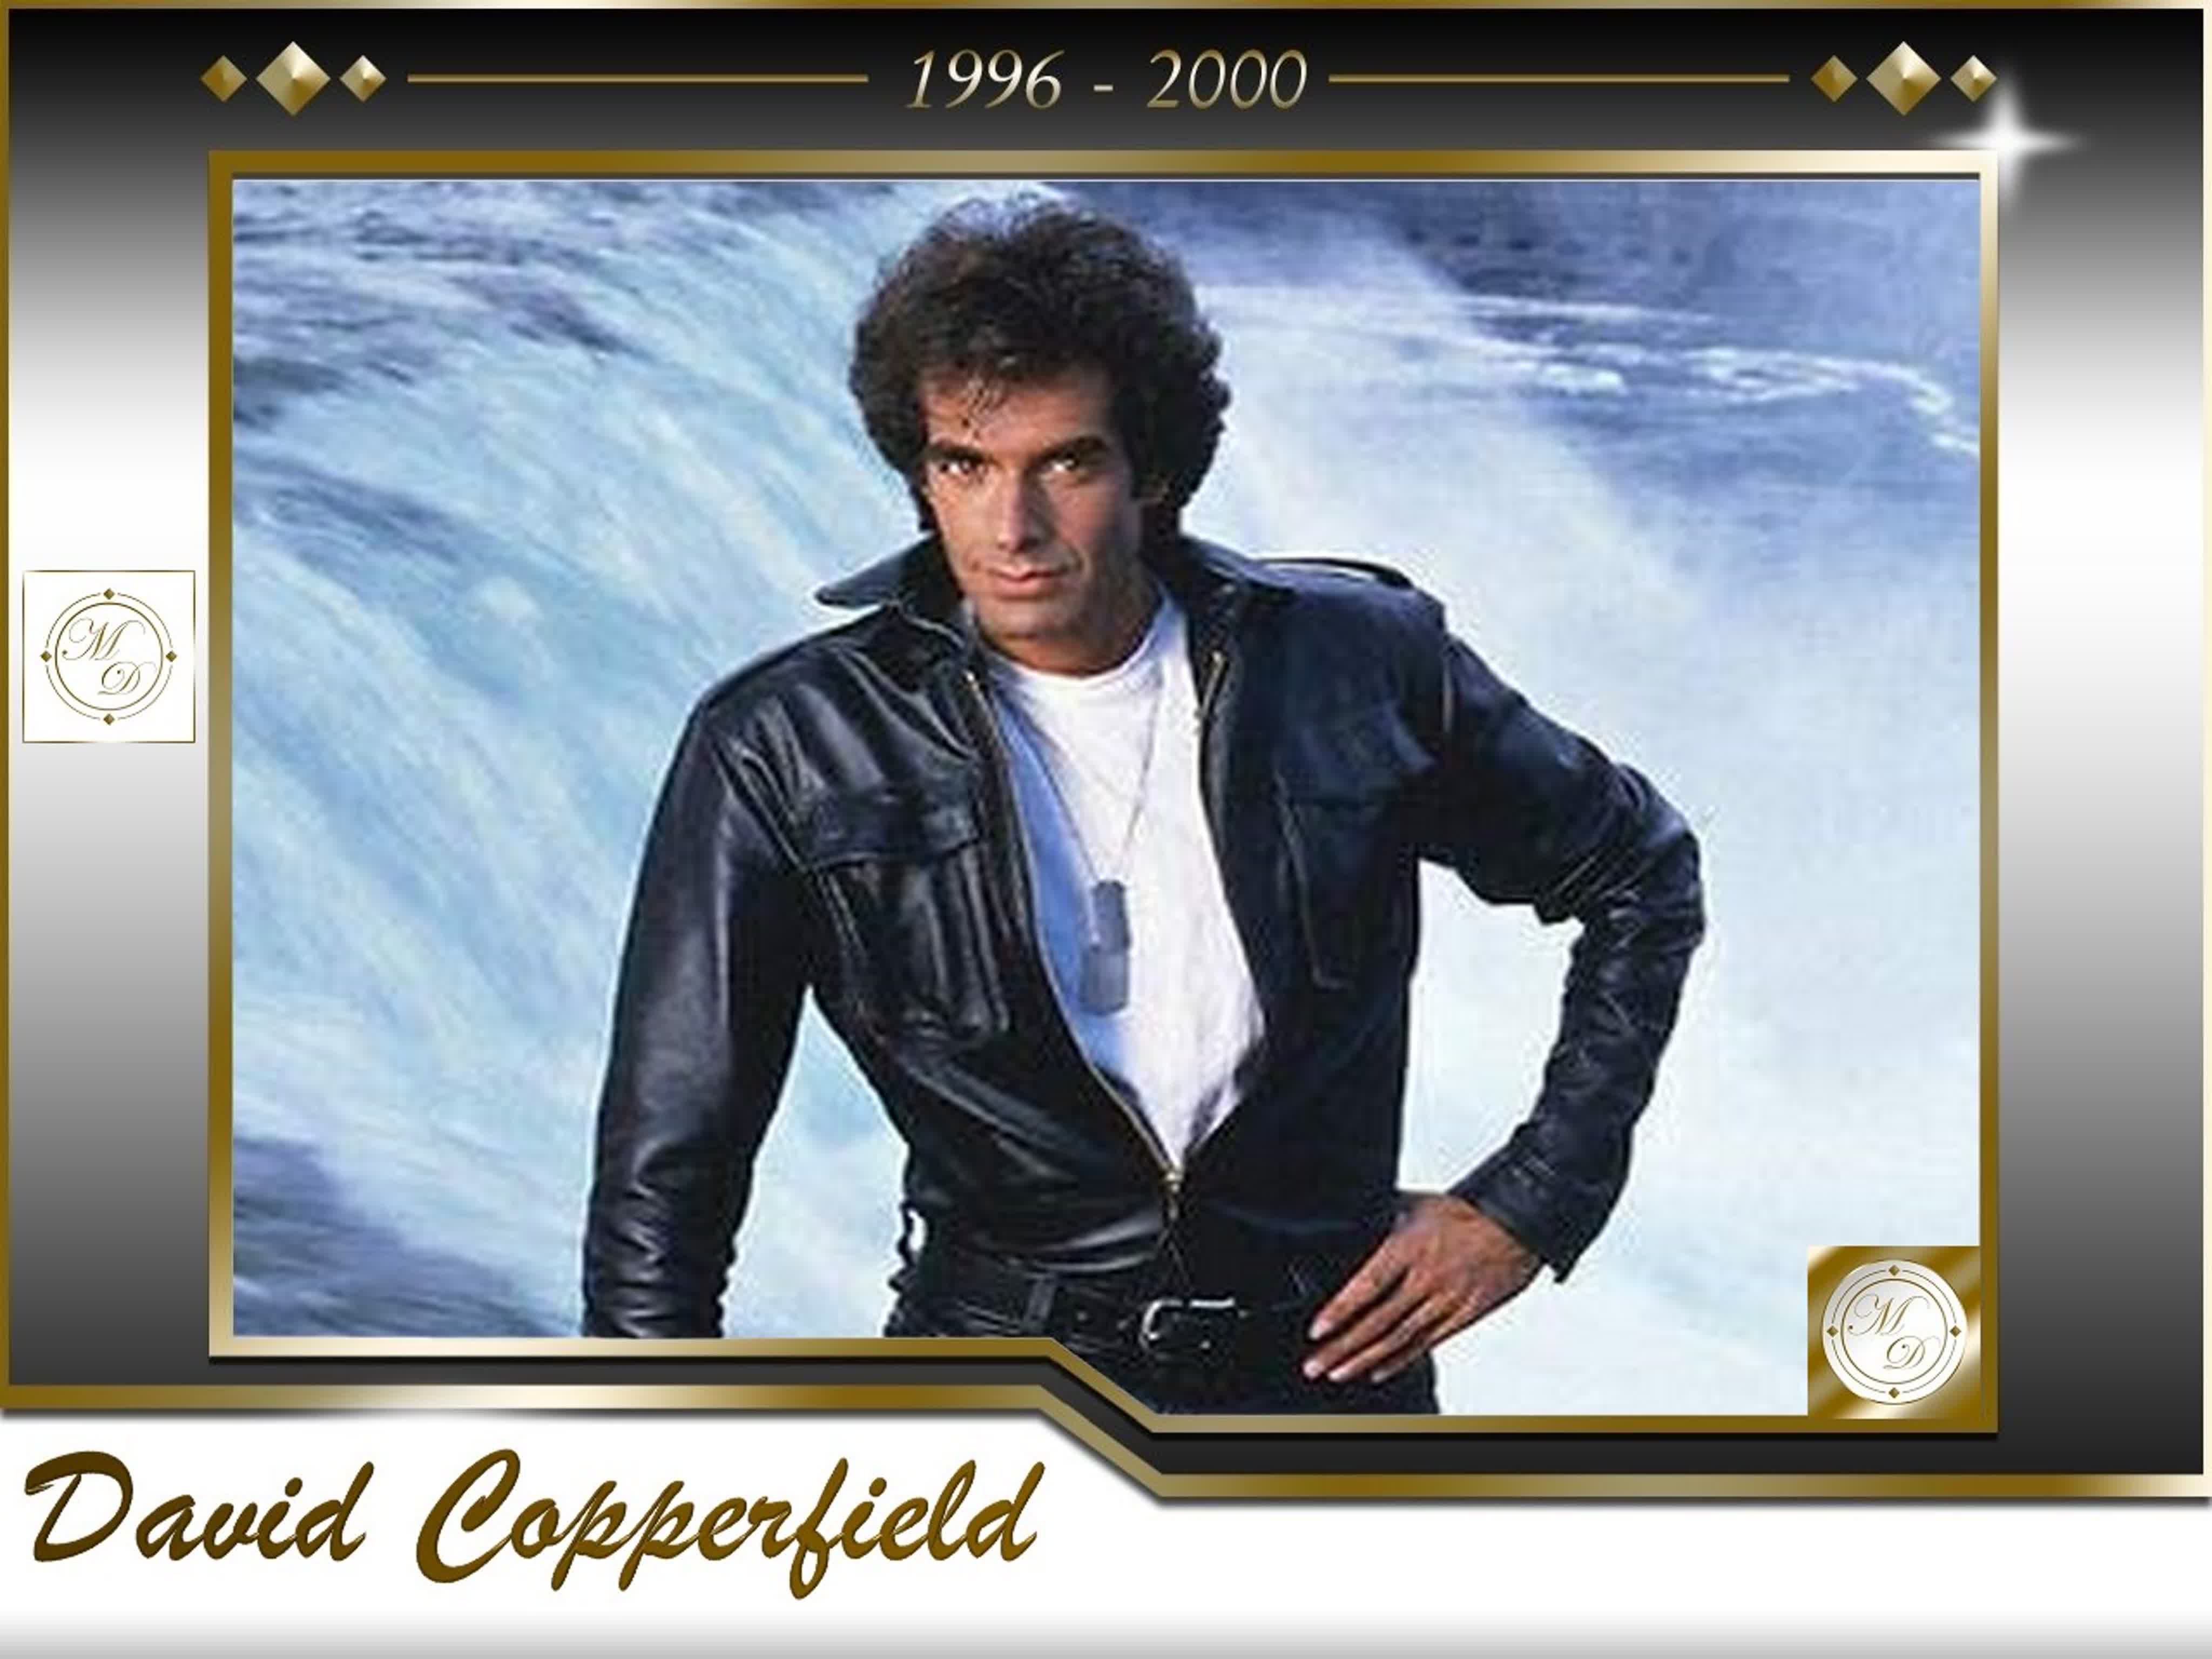 David Copperfield's shows